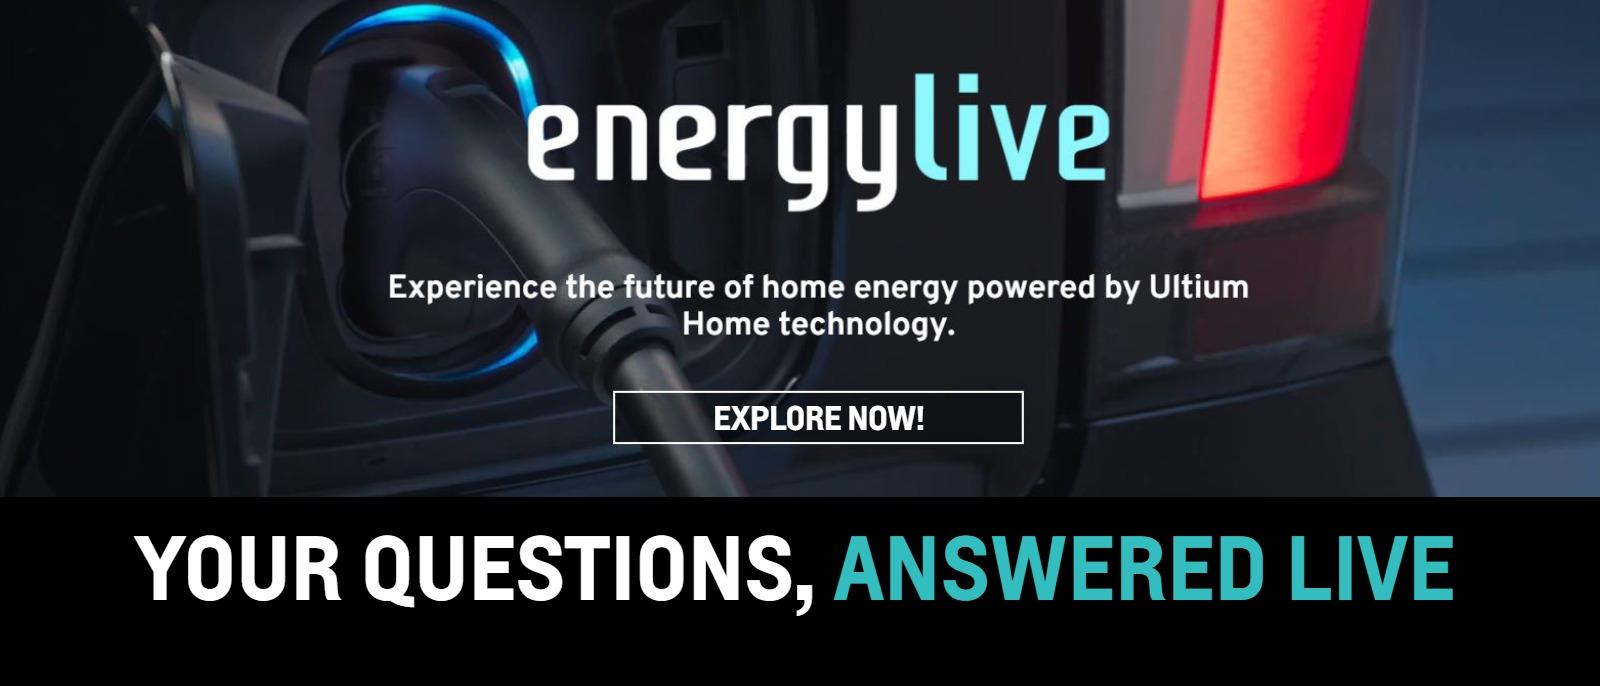 energylive Experience the future of home energy powered by Ultiium Home technology.
Your Questions, Answered Live